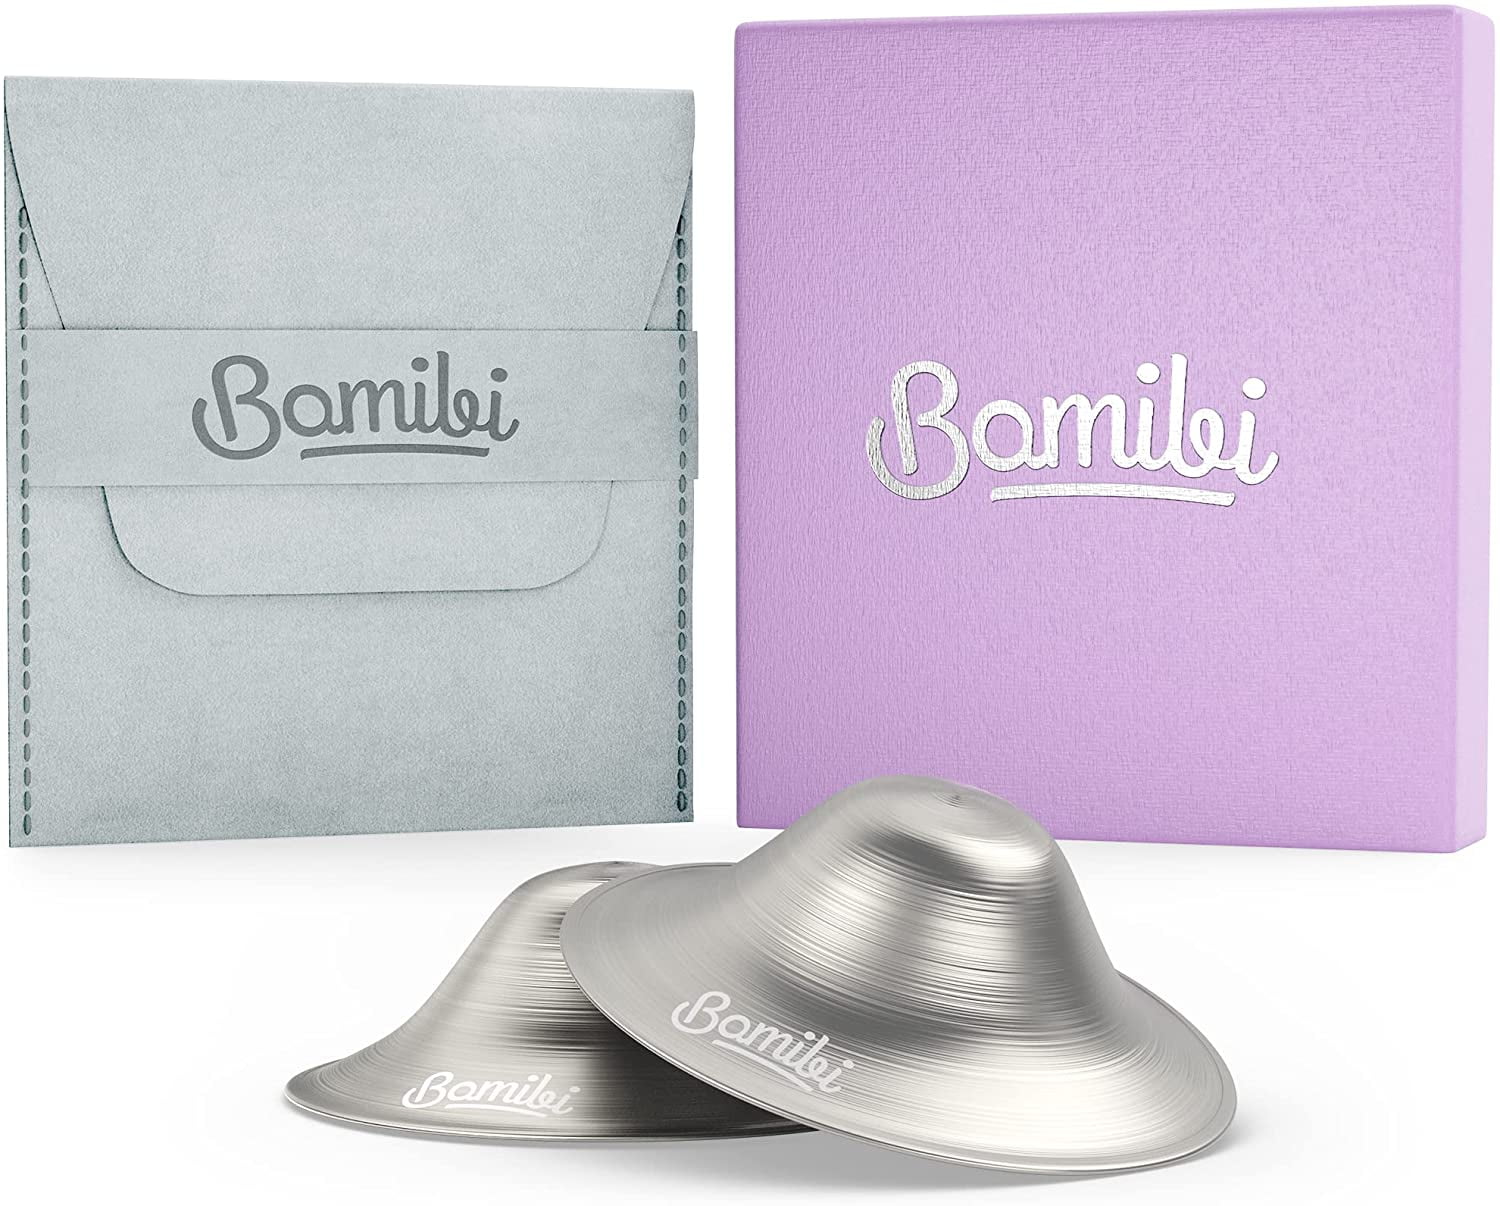 999 Silver Nursing Cups Soothe and Protect Your Nursing Nipples Nickel Free Bamibi Silver Nipple Shields for Nursing Newborn 